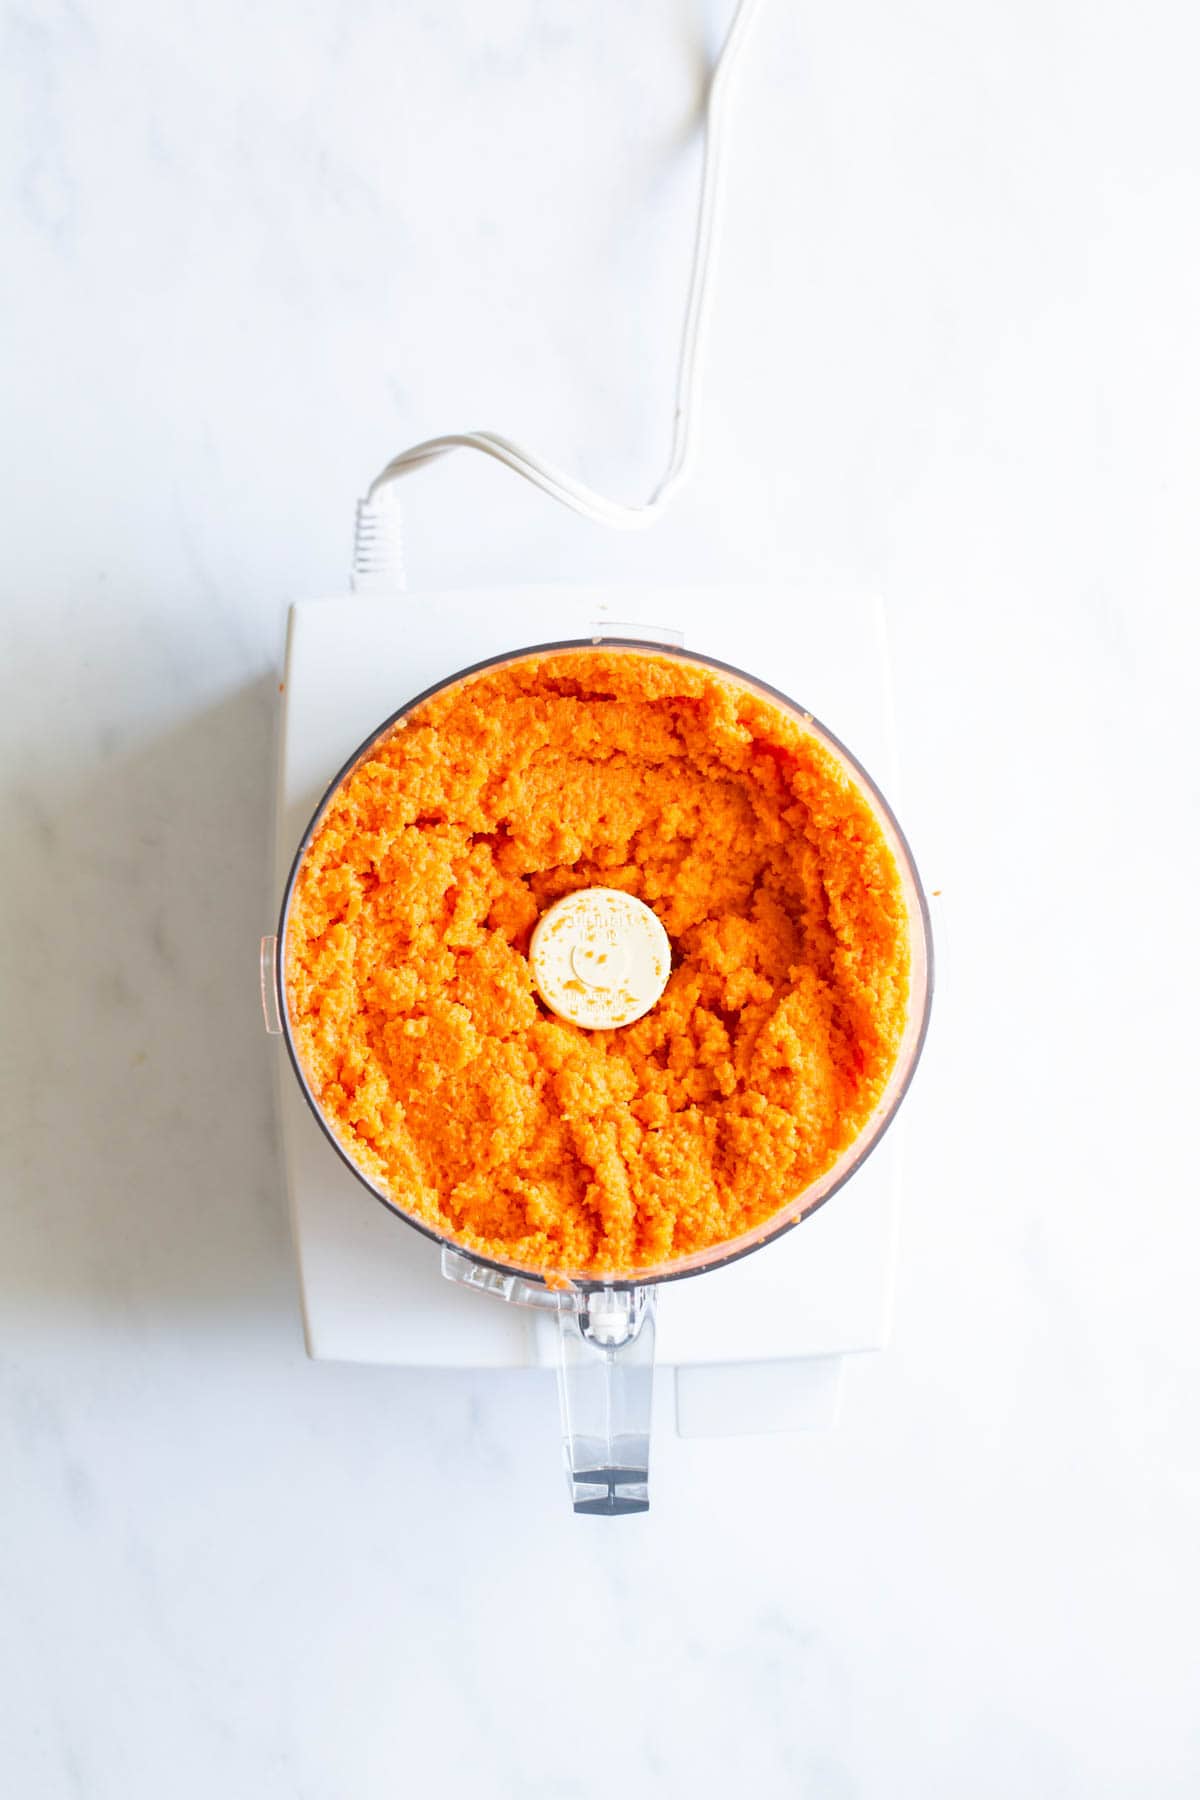 Top-down view of a food processor filled with a freshly prepared orange mixture.